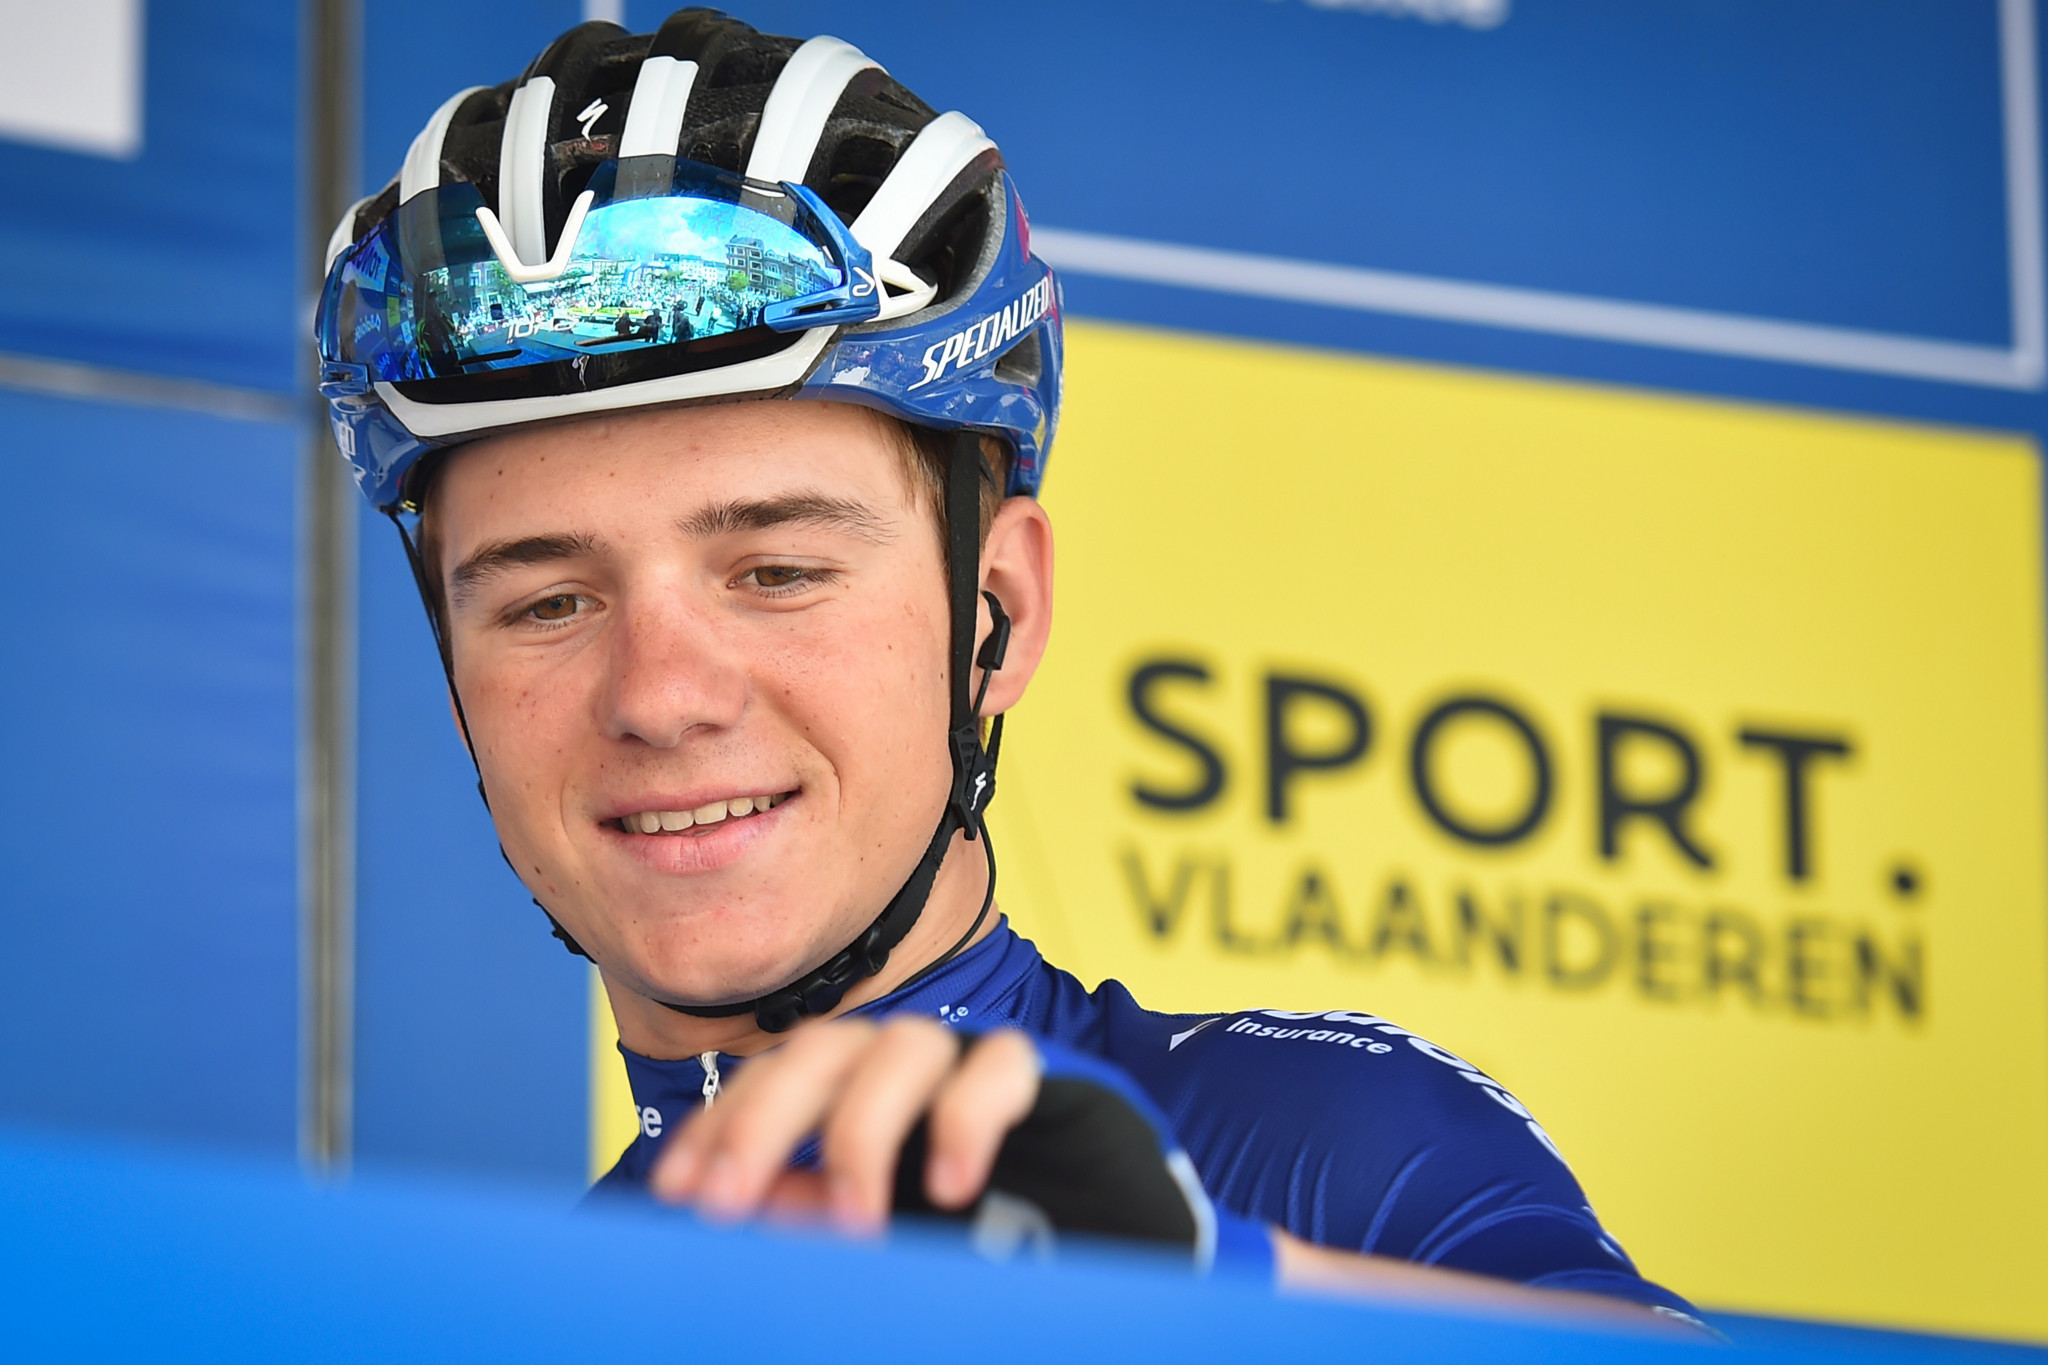 Rising star Evenepoel takes Tour of Pologne race lead with solo stage win